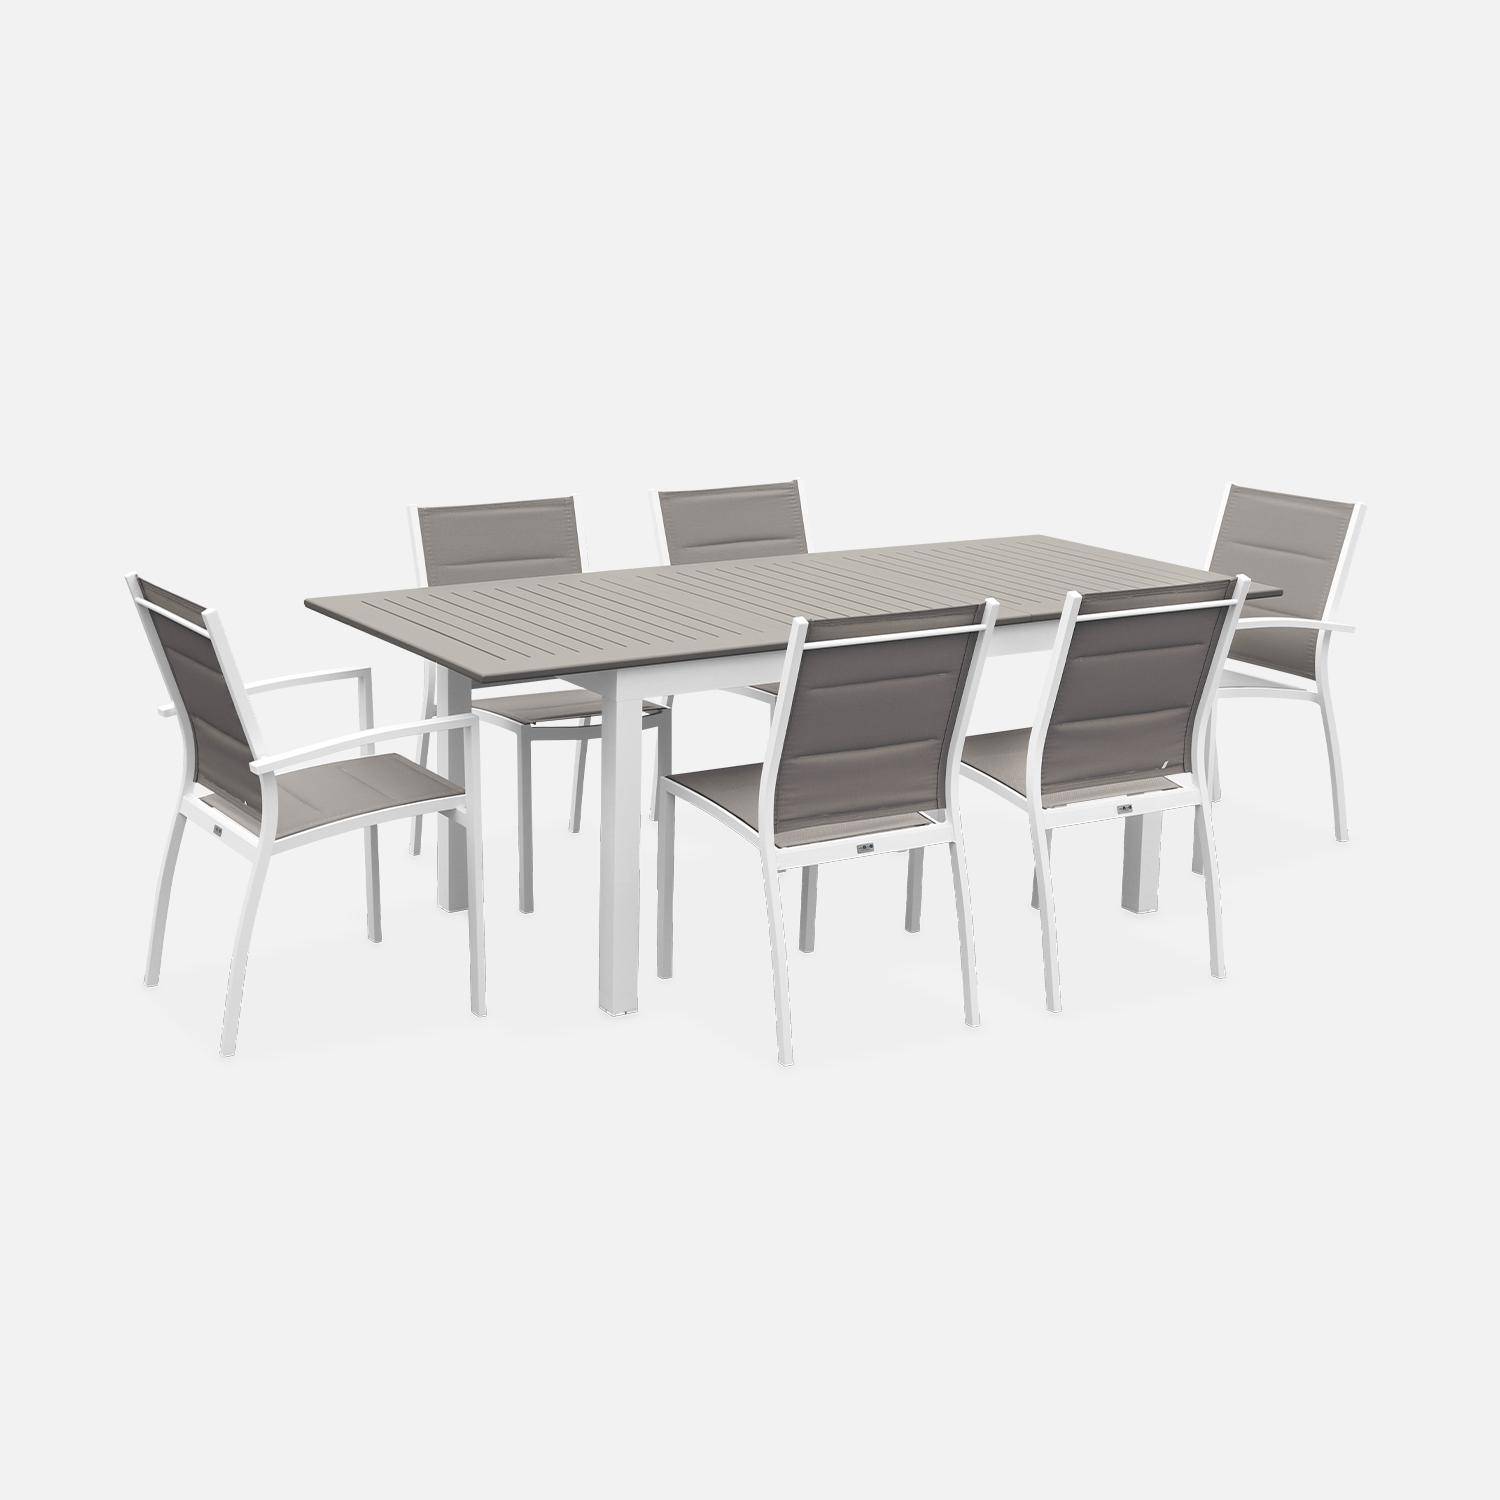 6-seater garden dining set, extendable 150-210cm aluminium table, 4 chairs and 2 armchairs - Chicago 6 - White frame, Beige-Brown textilene,sweeek,Photo2